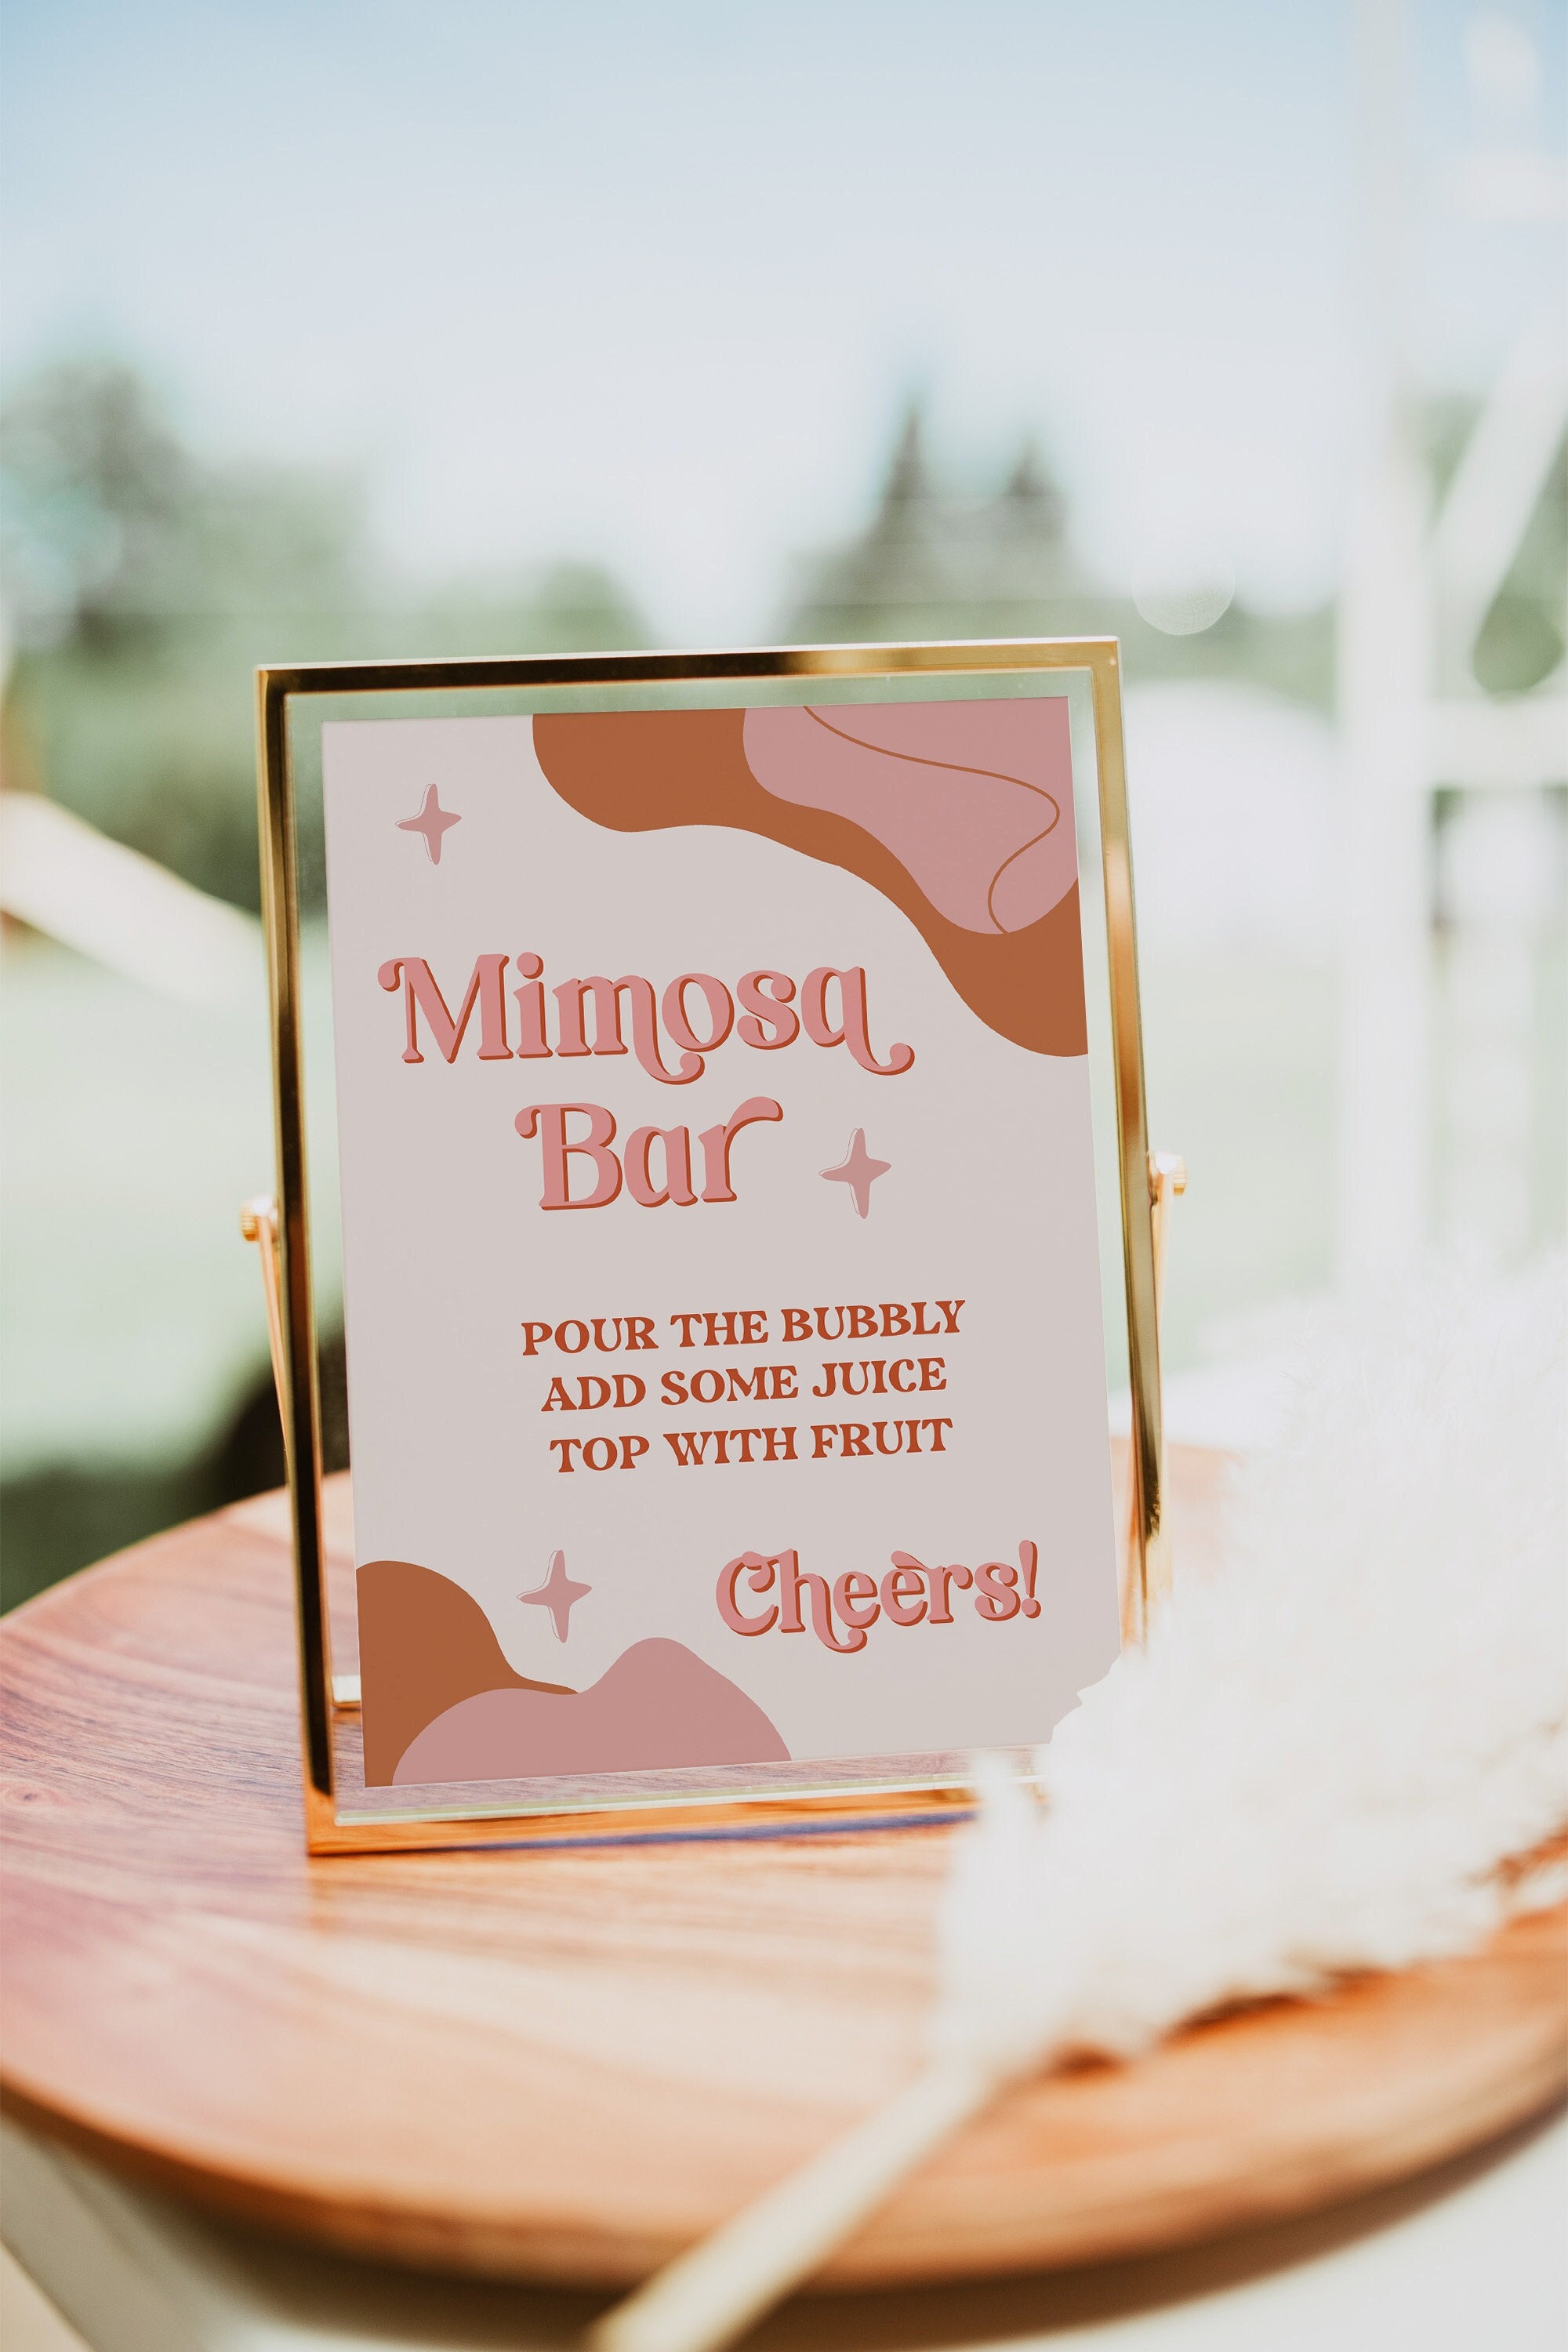 feather boa backdrop and banner - with a champagne / mimosa bar  Bridal  bachelorette party, Bachelorette party decorations, Bachelorette party  planning